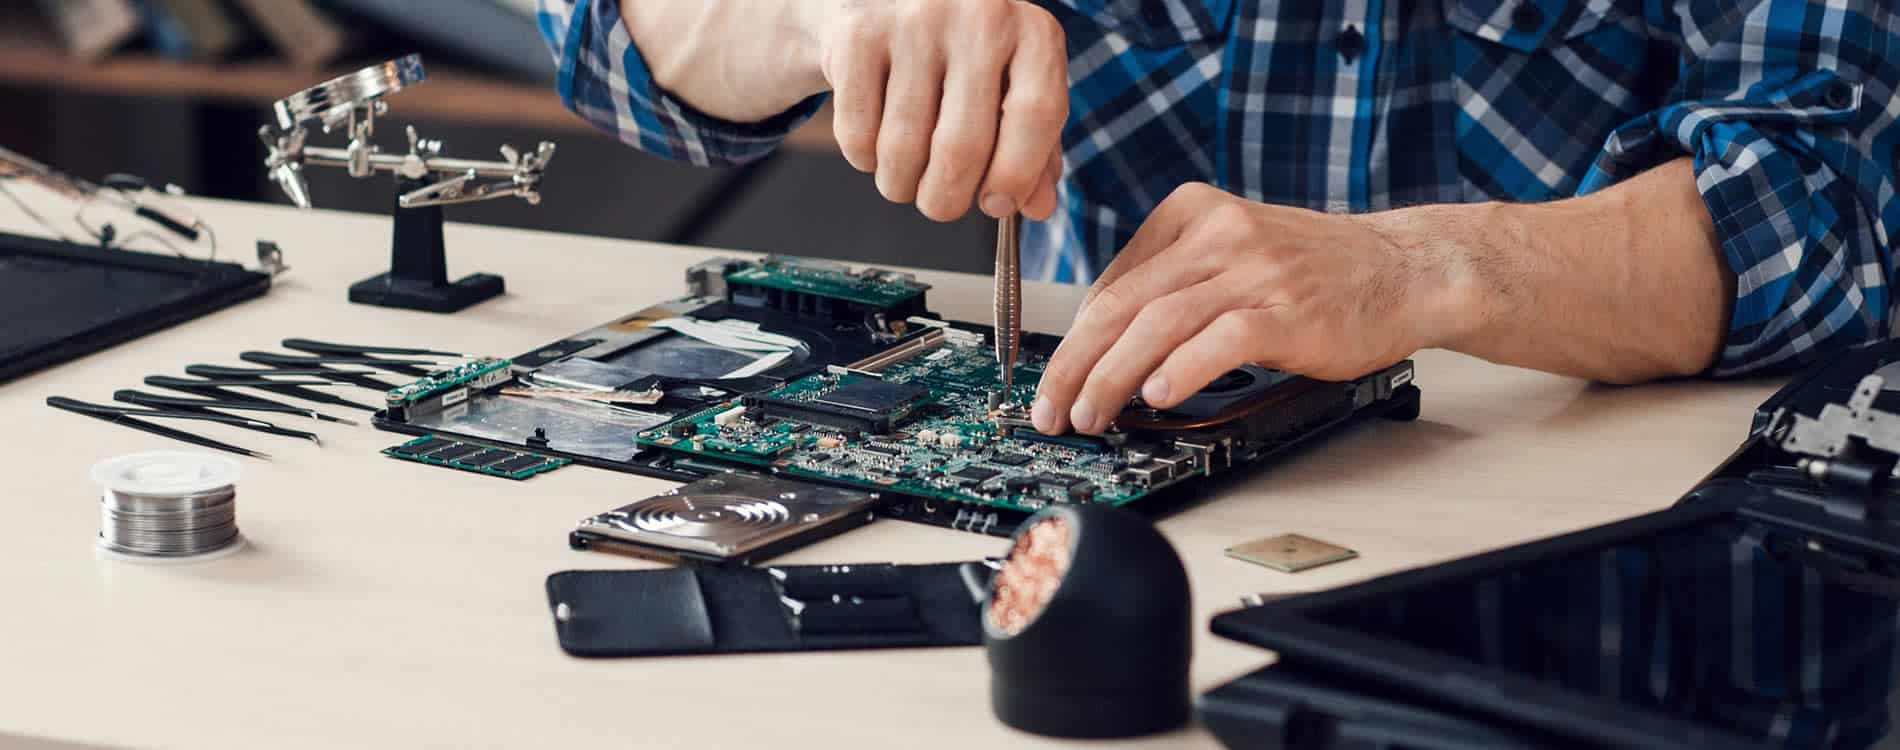 How to Start a Computer Repair Business